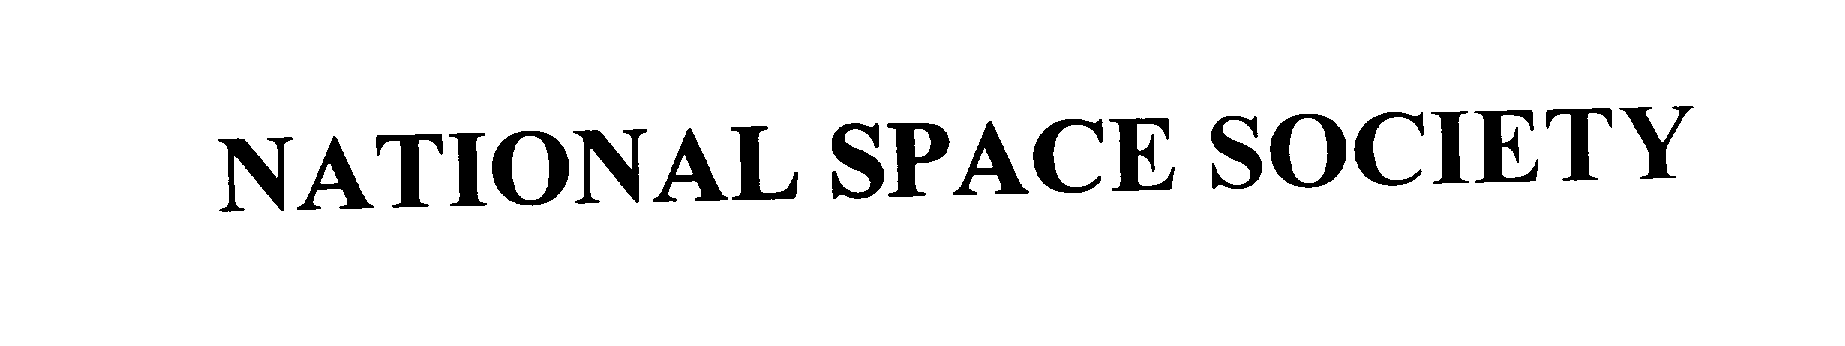  NATIONAL SPACE SOCIETY